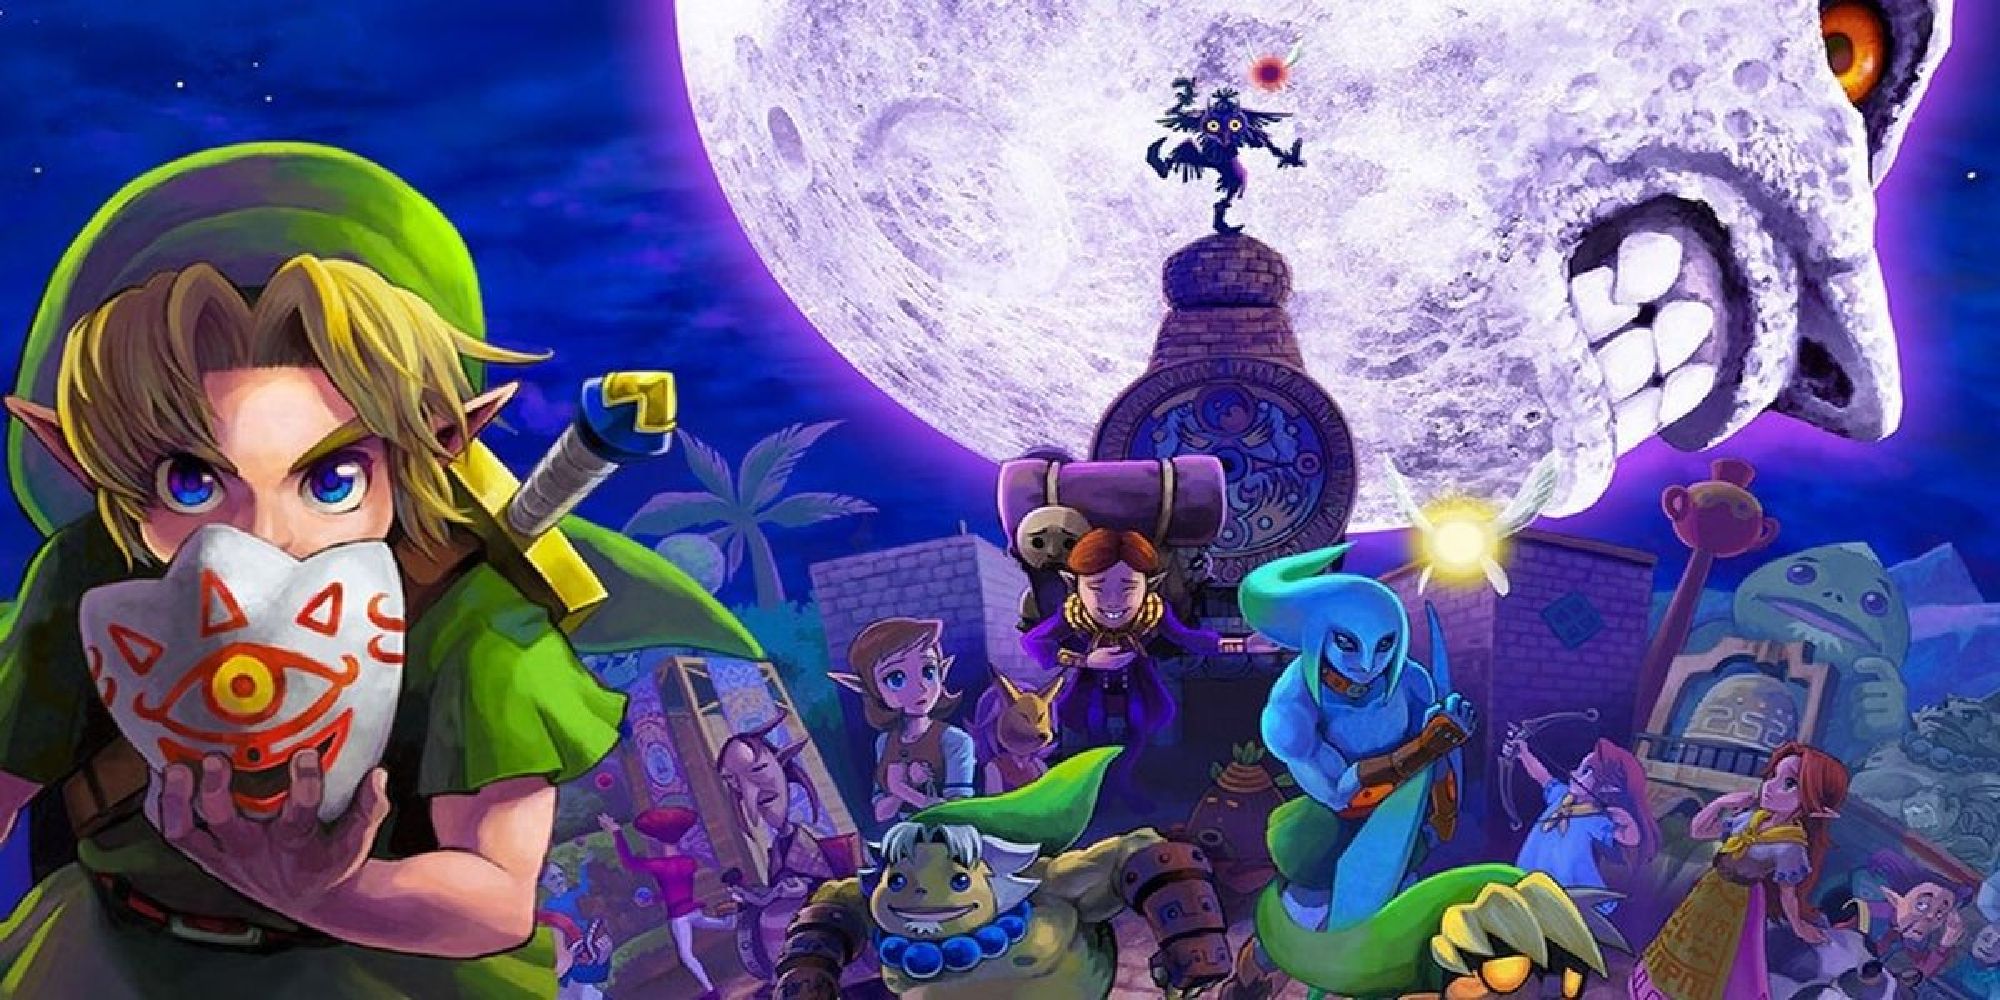 promotional art for majoras mask showing link and clock town in termina